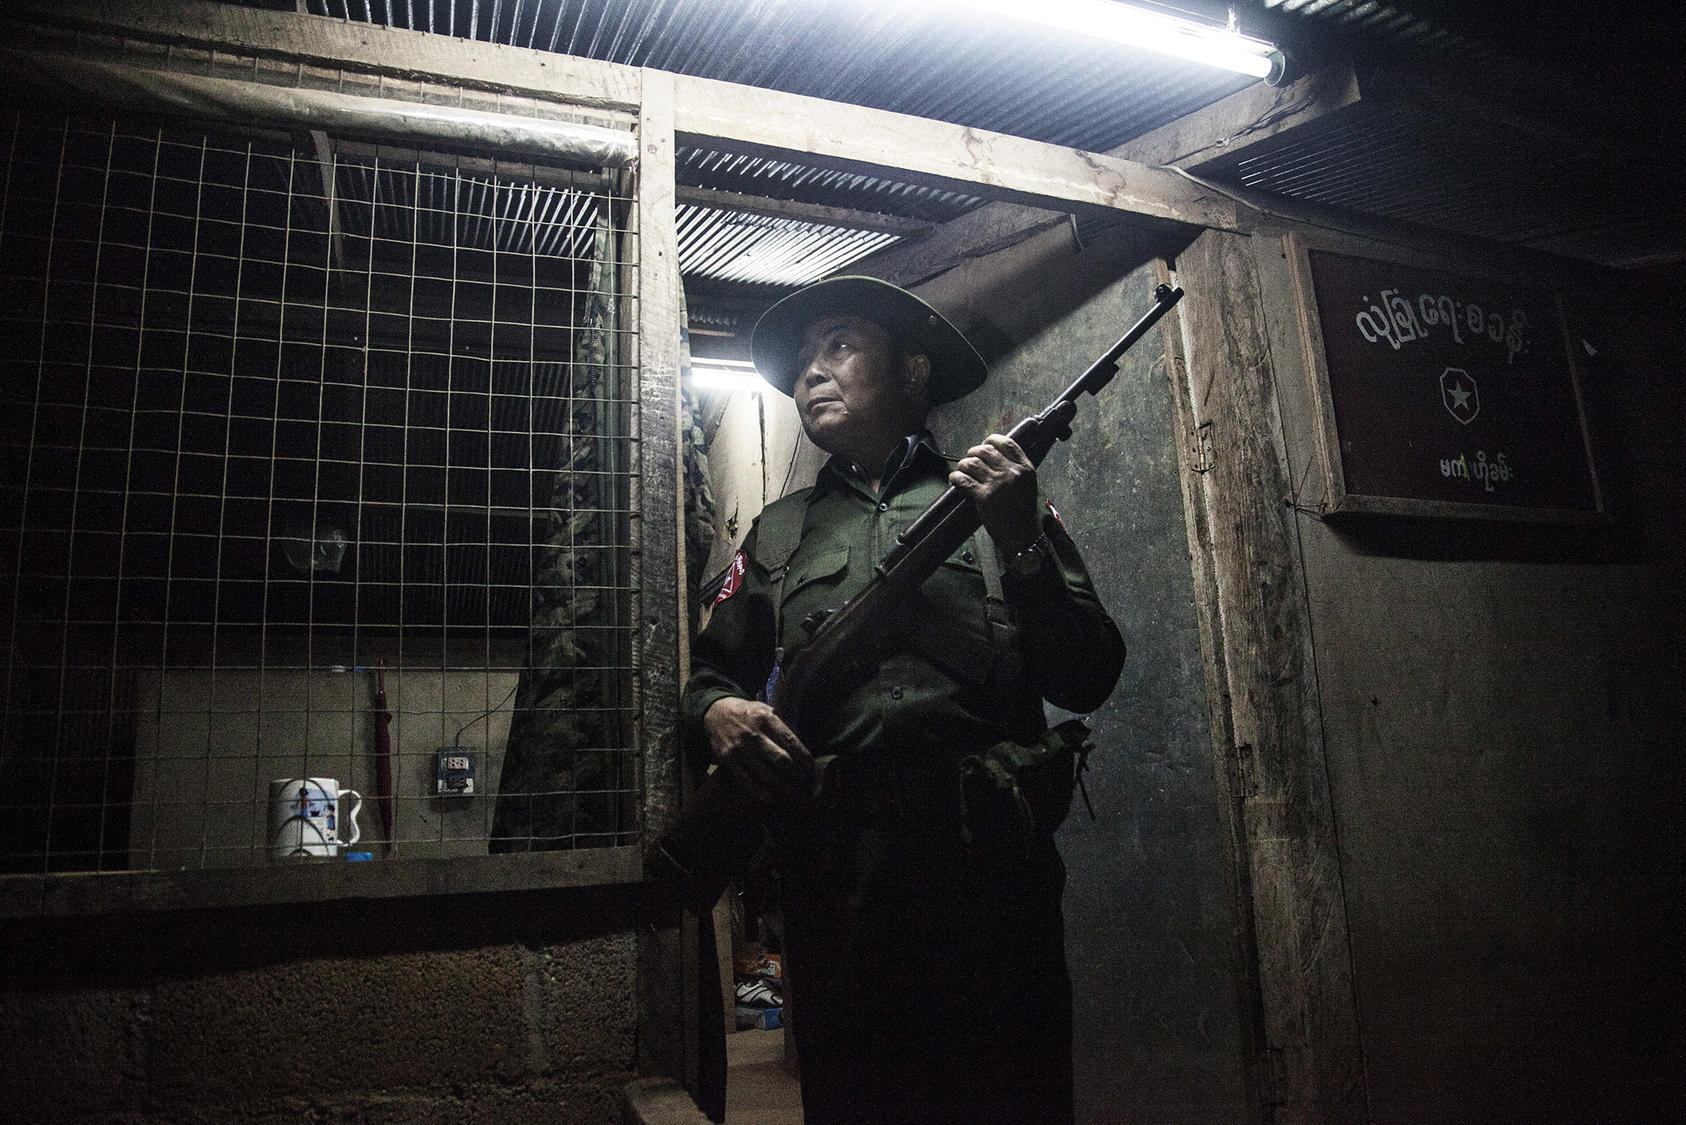 A Burmese soldier at the border with Thailand in Tachileik, Myanmar. November 20, 2013. (Guillem Valle/ The New York Times)